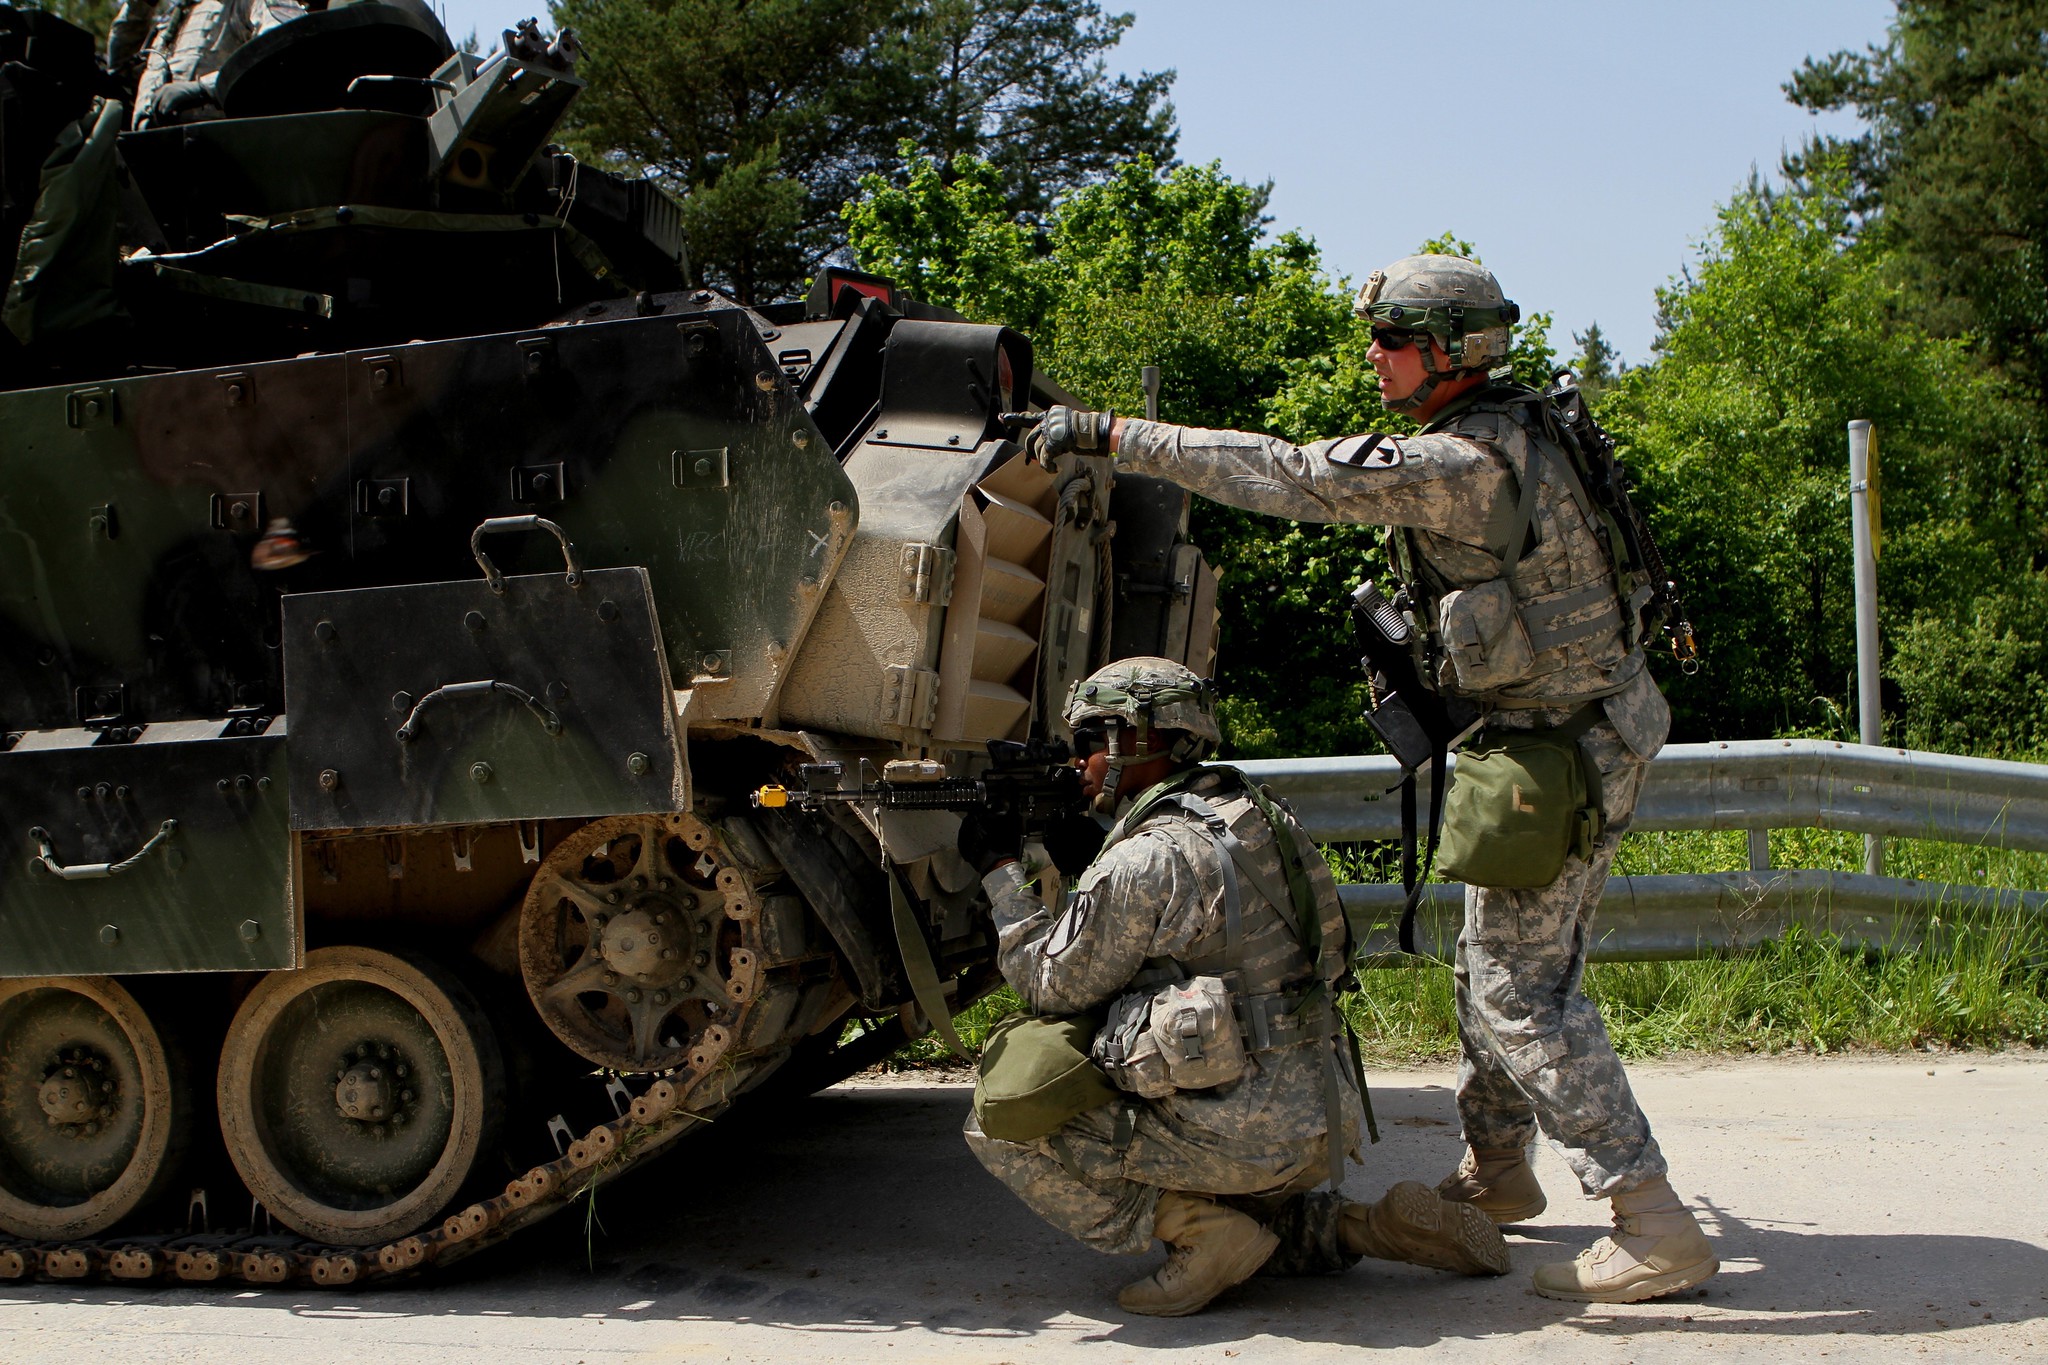 U.S. soldiers take part in a training exercise in&nbsp;Hohenfels, Germany.